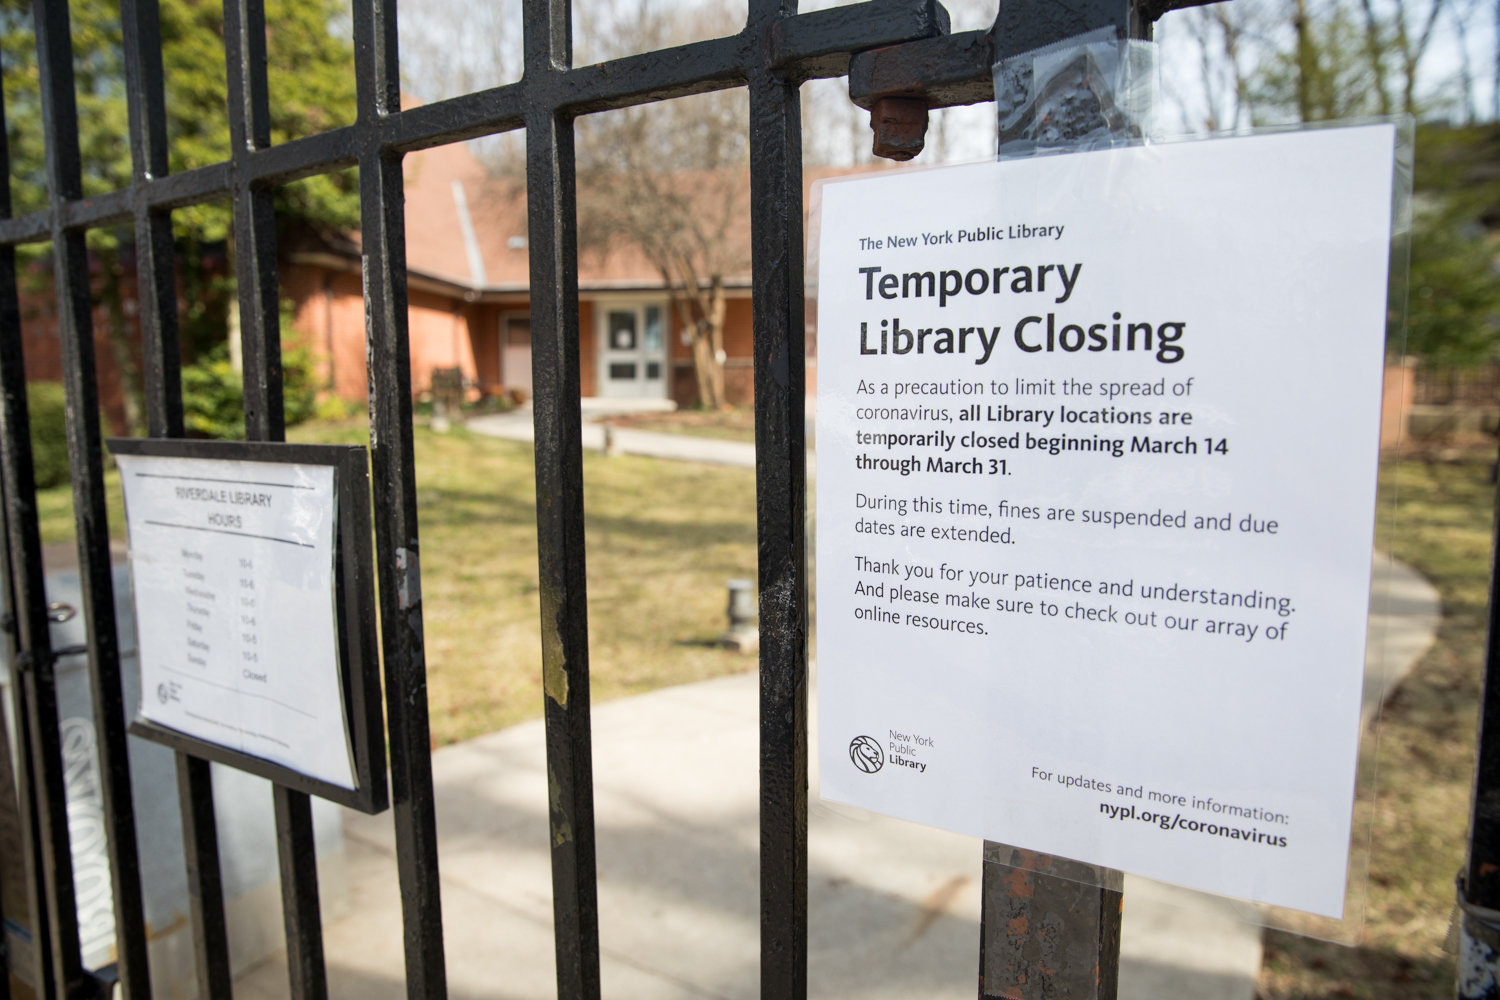 A sign announces the temporary closure of the Riverdale Library in response to the coronavirus outbreak.